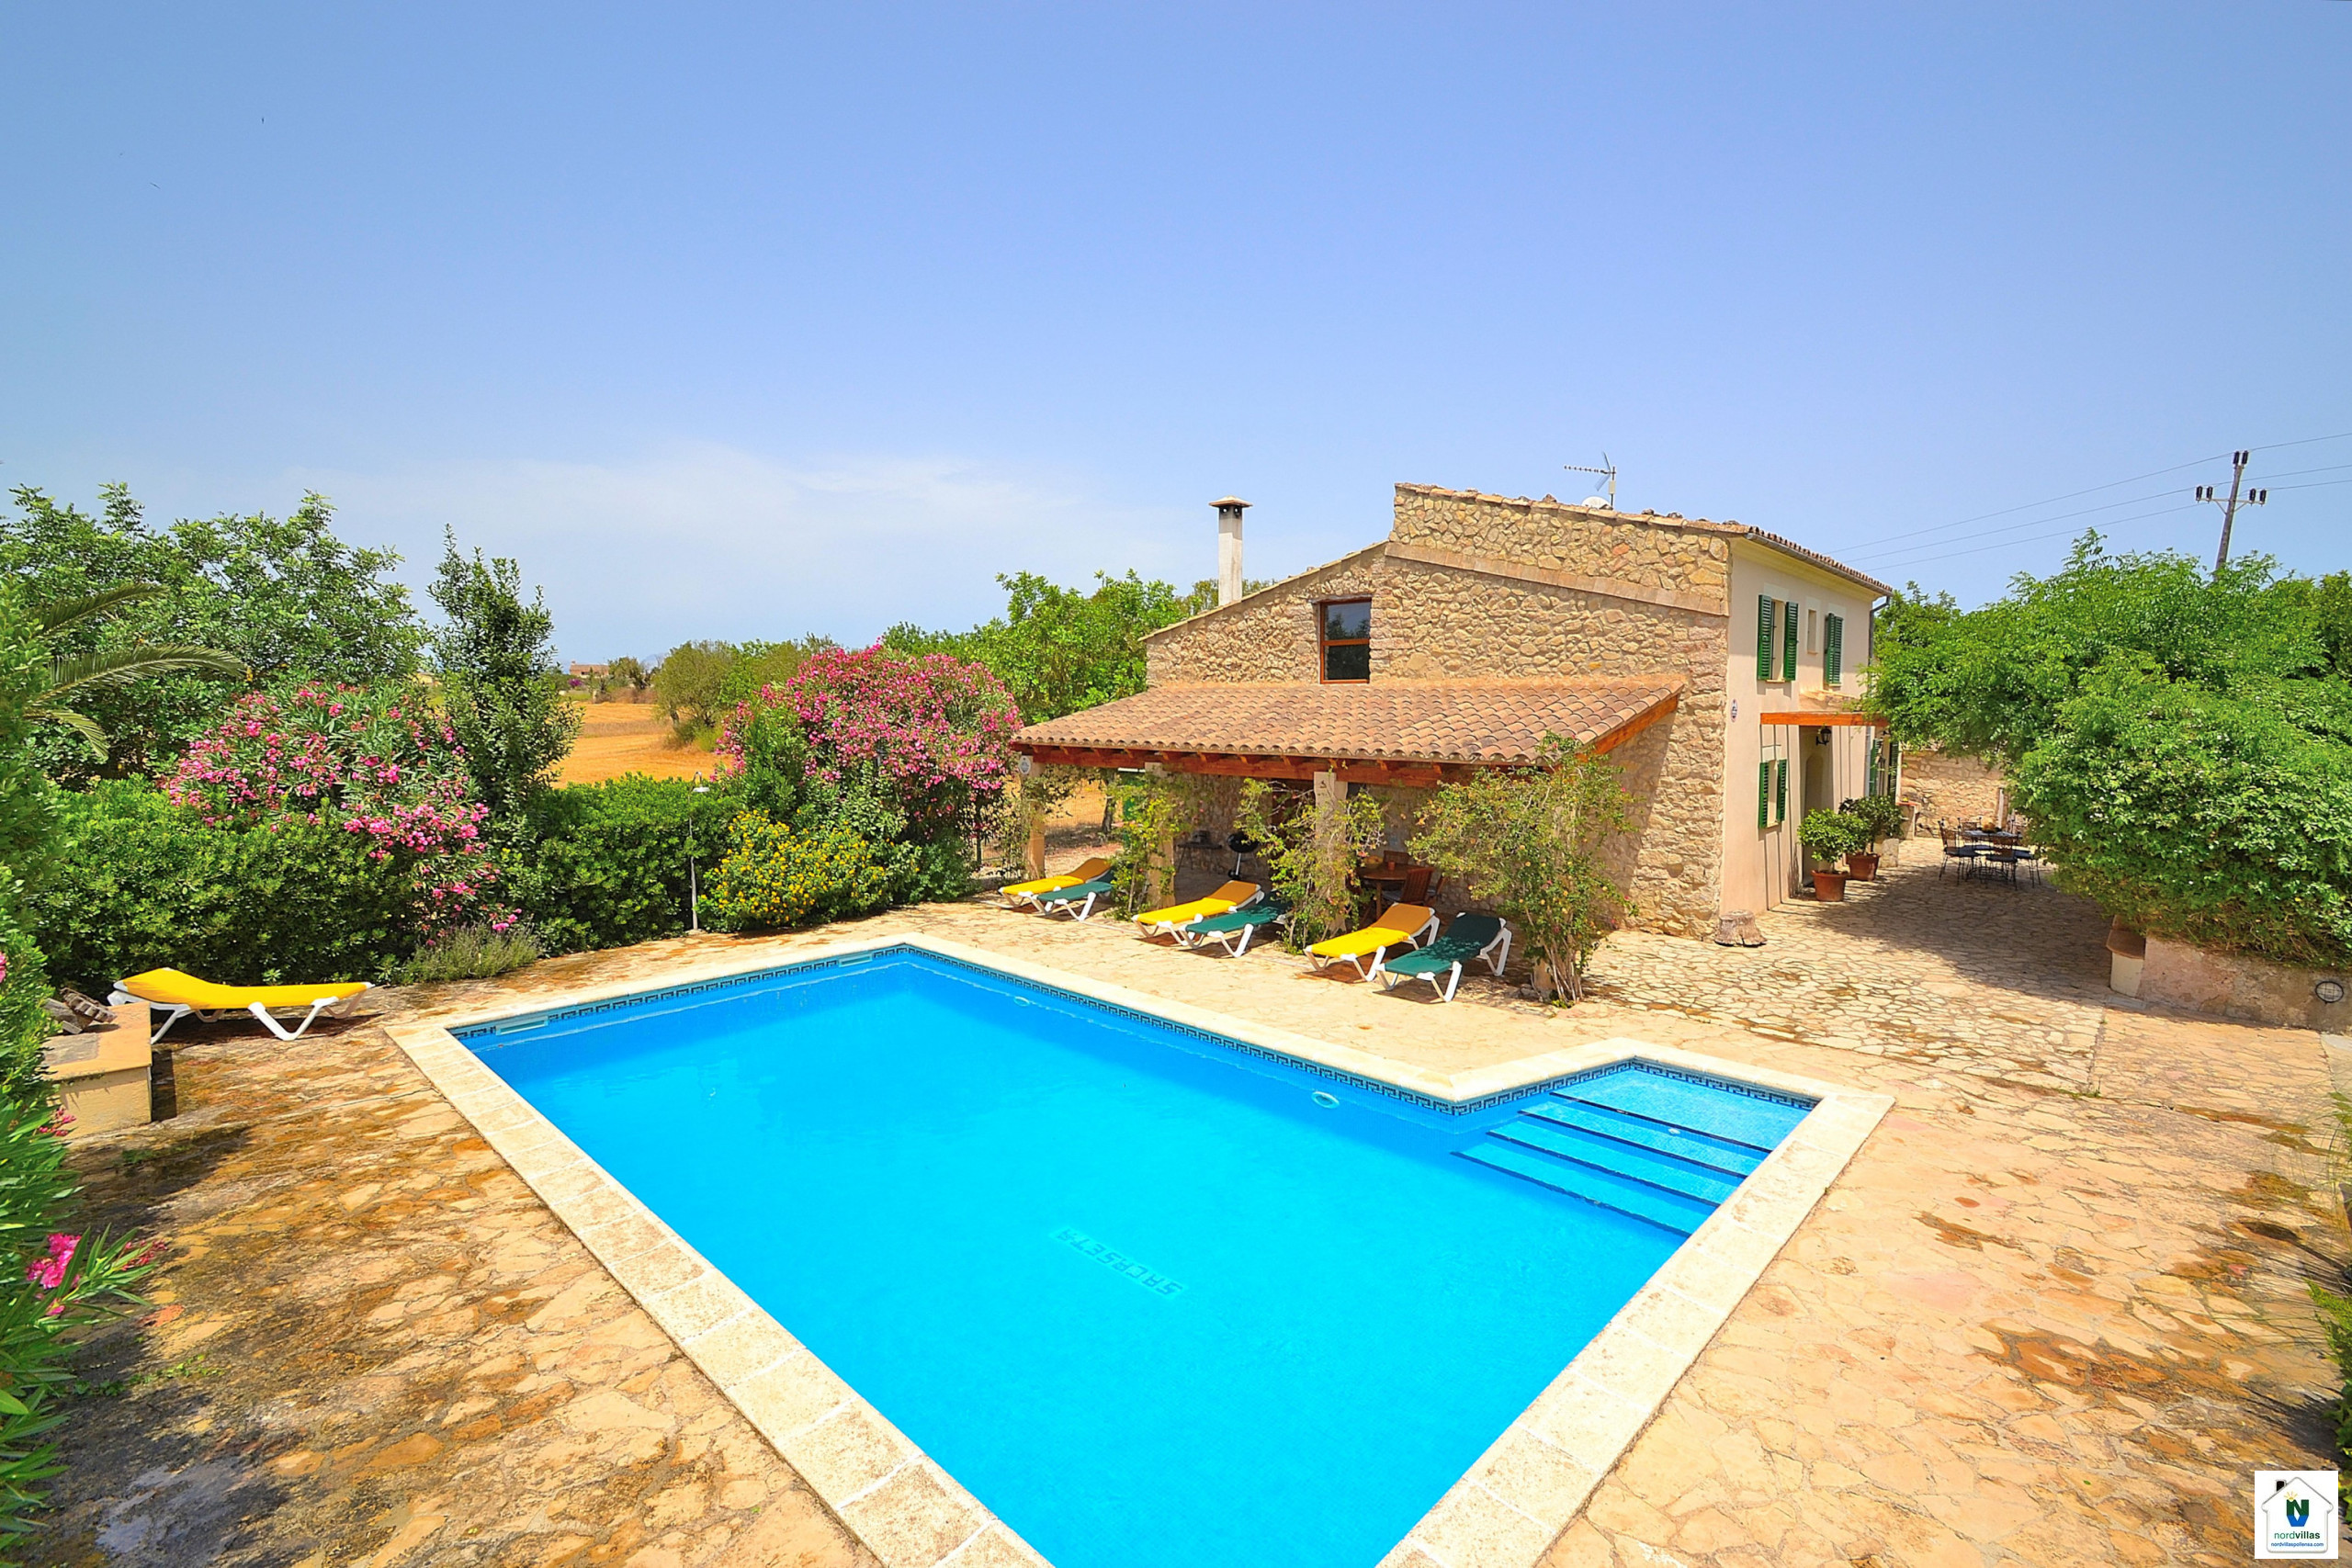 Beautiful finca with pool, for rent in Mallorca